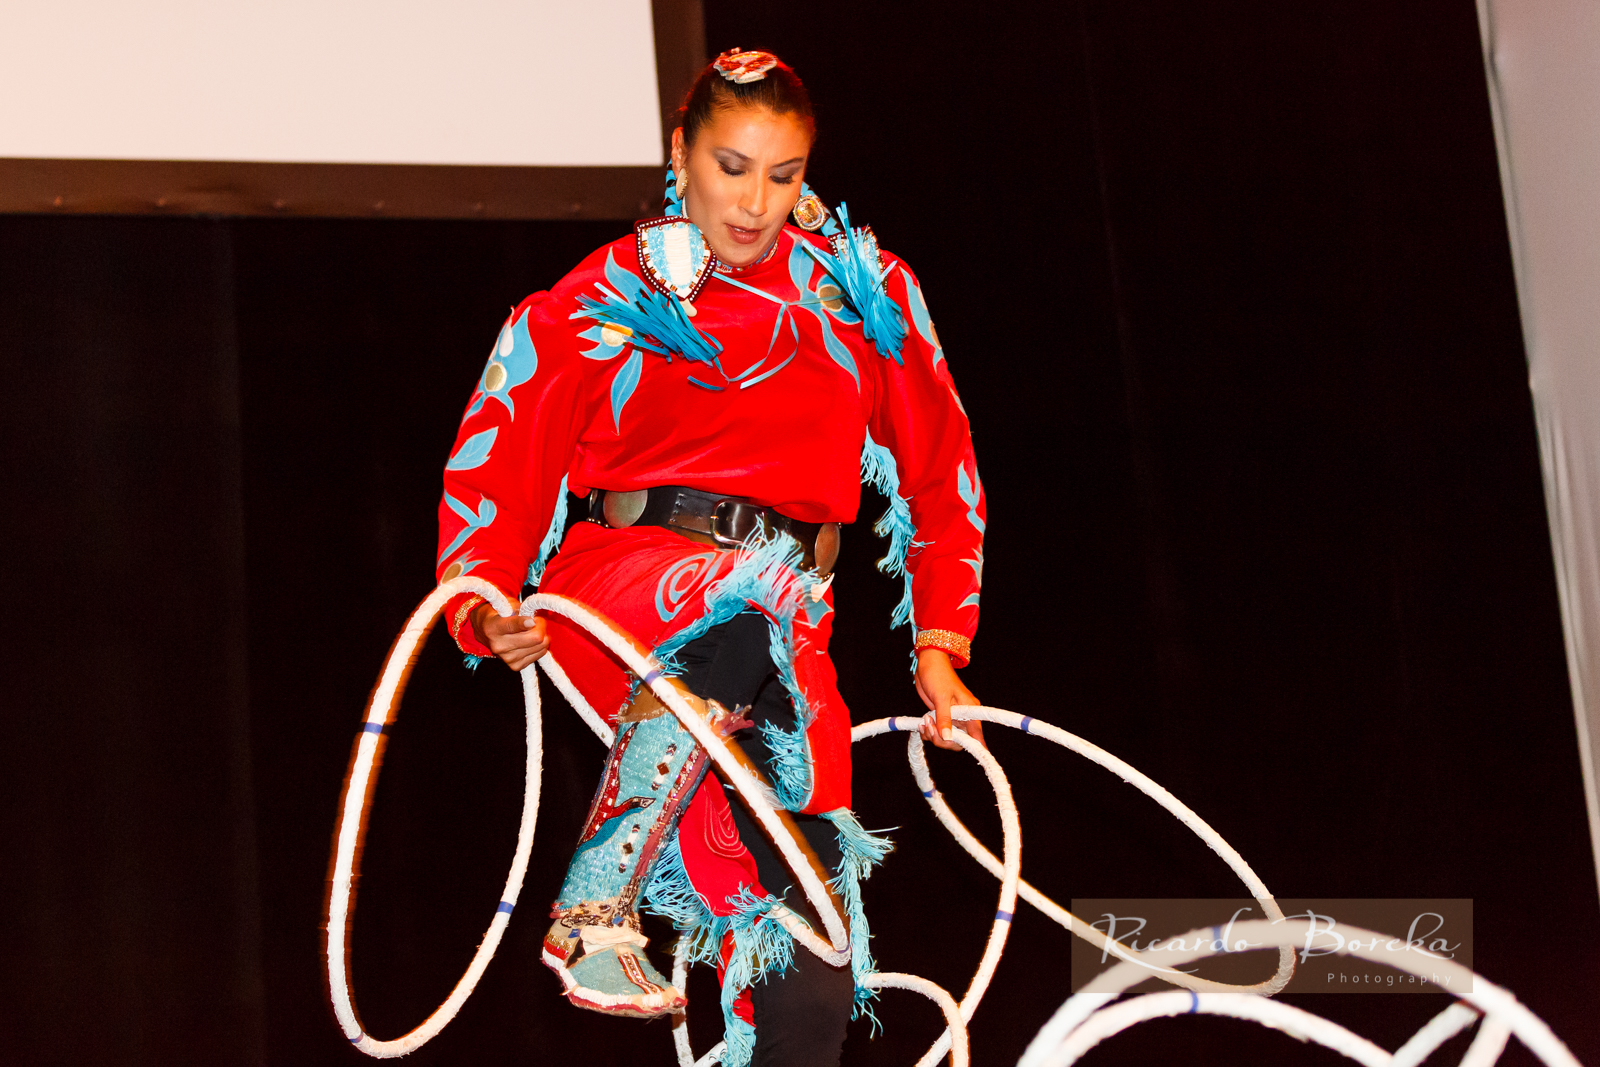 photograph of first nations woman dancing with hoops, wearing a red and blue costume